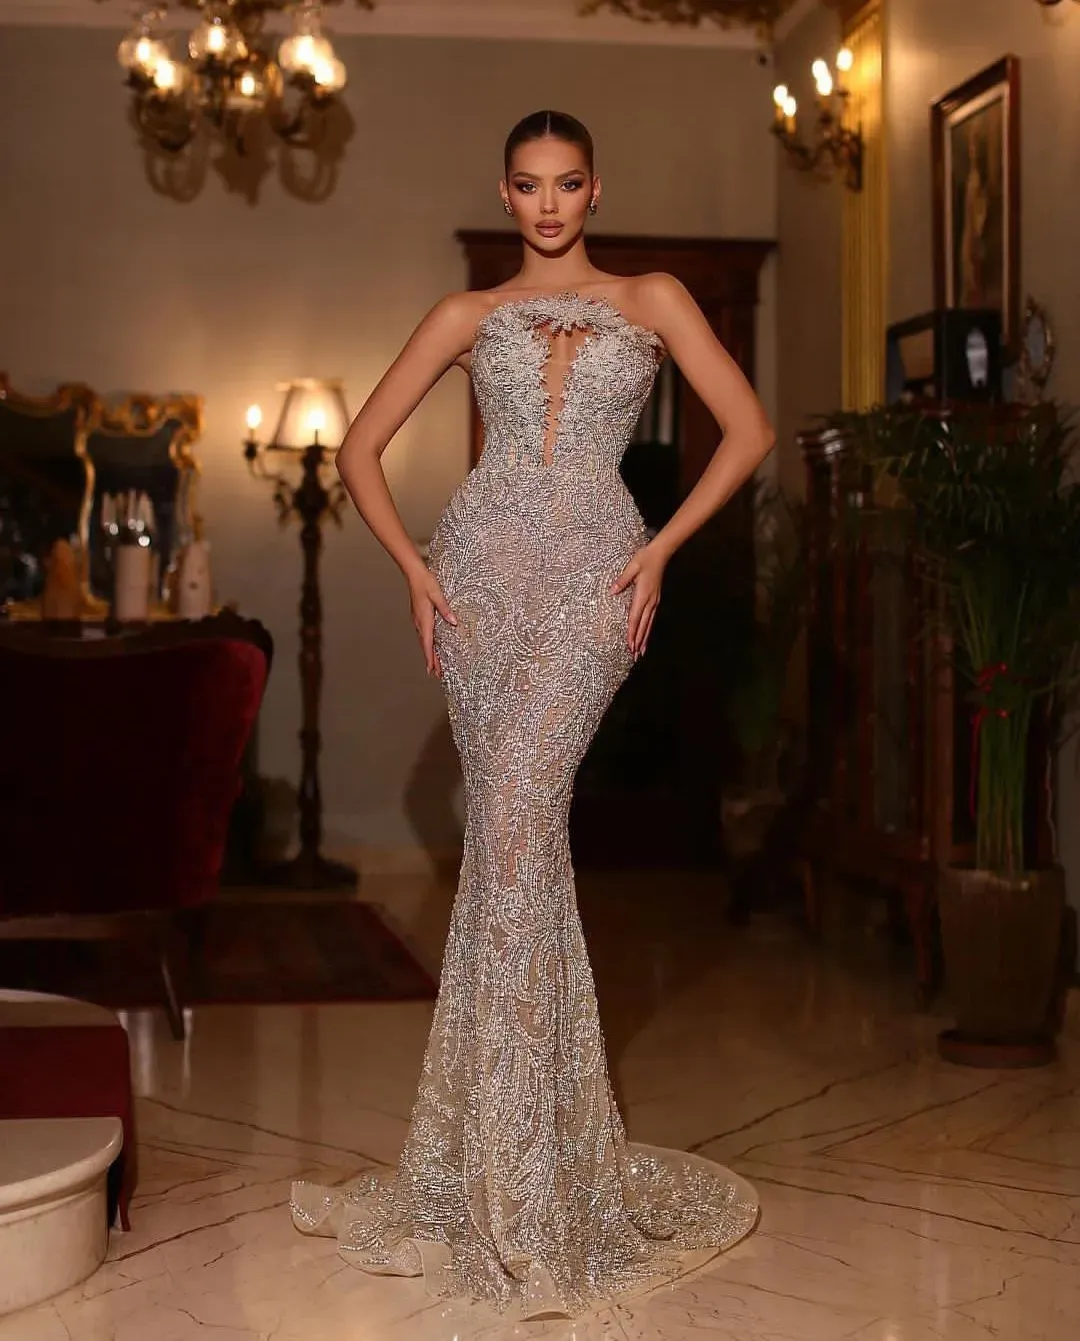 Sleeveless Mermaid Evening V Neck Beaded Exquisite Appliques Sequins Floor Length Celebrity 3D Lace Hollow Formal Prom Dresses Gowns Party Dress